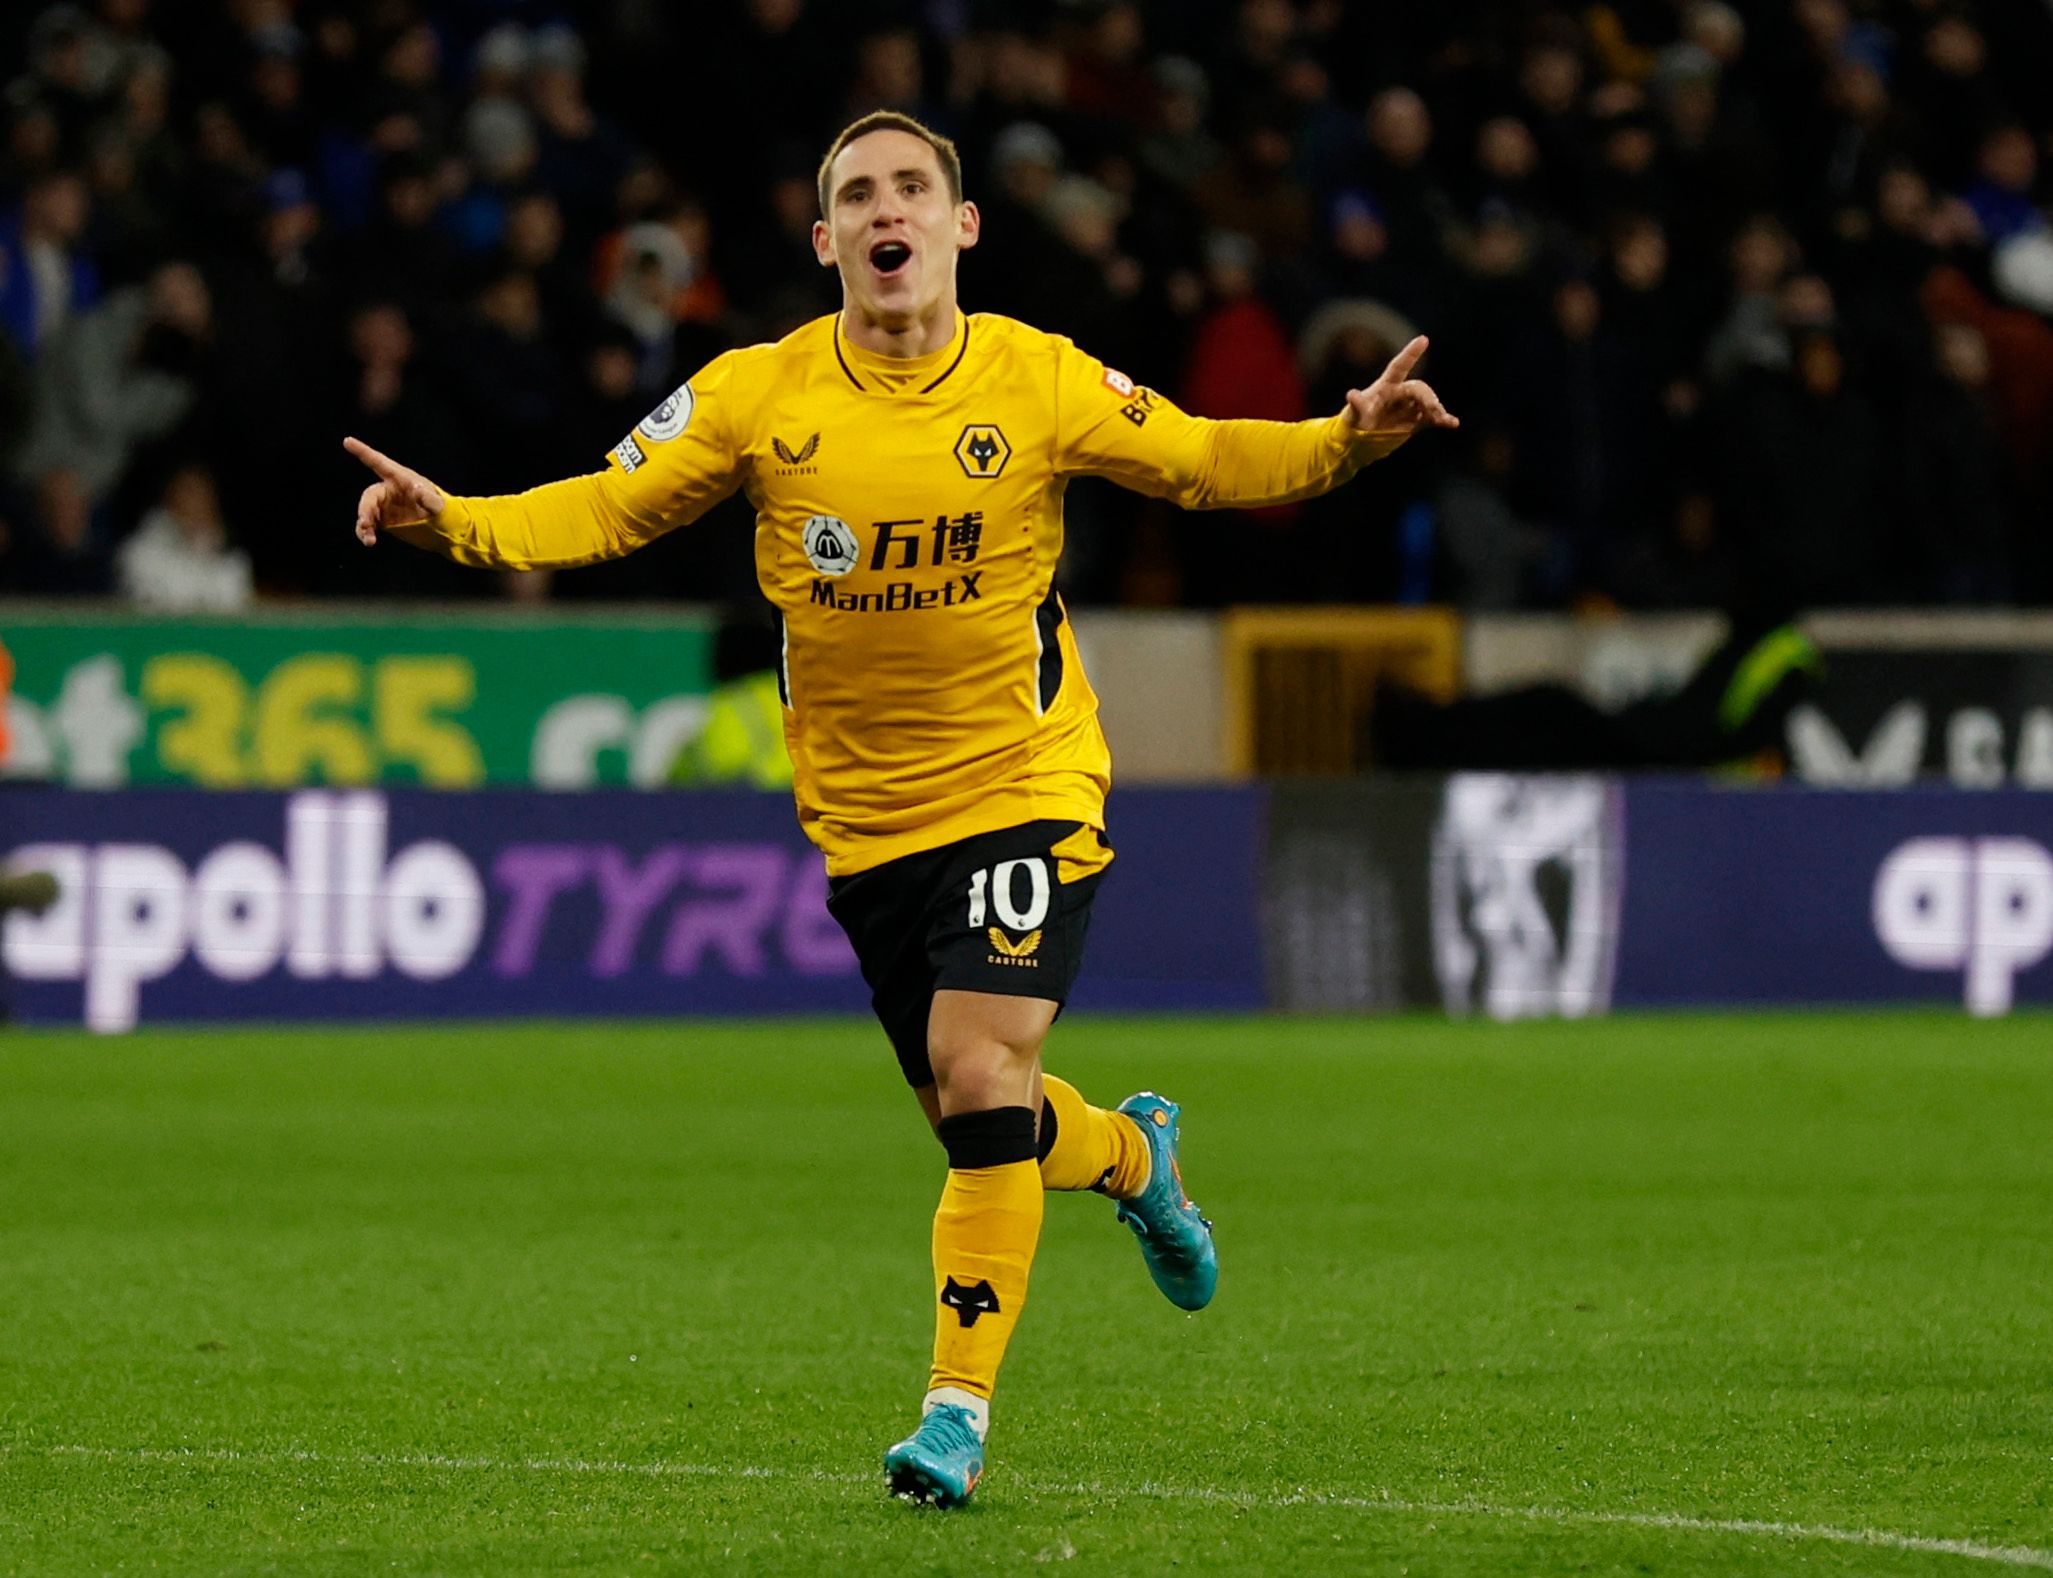 Soccer Football - Premier League - Wolverhampton Wanderers v Leicester City - Molineux Stadium, Wolverhampton, Britain - February 20, 2022 Wolverhampton Wanderers' Daniel Podence celebrates scoring their second goal Action Images via Reuters/Jason Cairnduff EDITORIAL USE ONLY. No use with unauthorized audio, video, data, fixture lists, club/league logos or 'live' services. Online in-match use limited to 75 images, no video emulation. No use in betting, games or single club /league/player publica